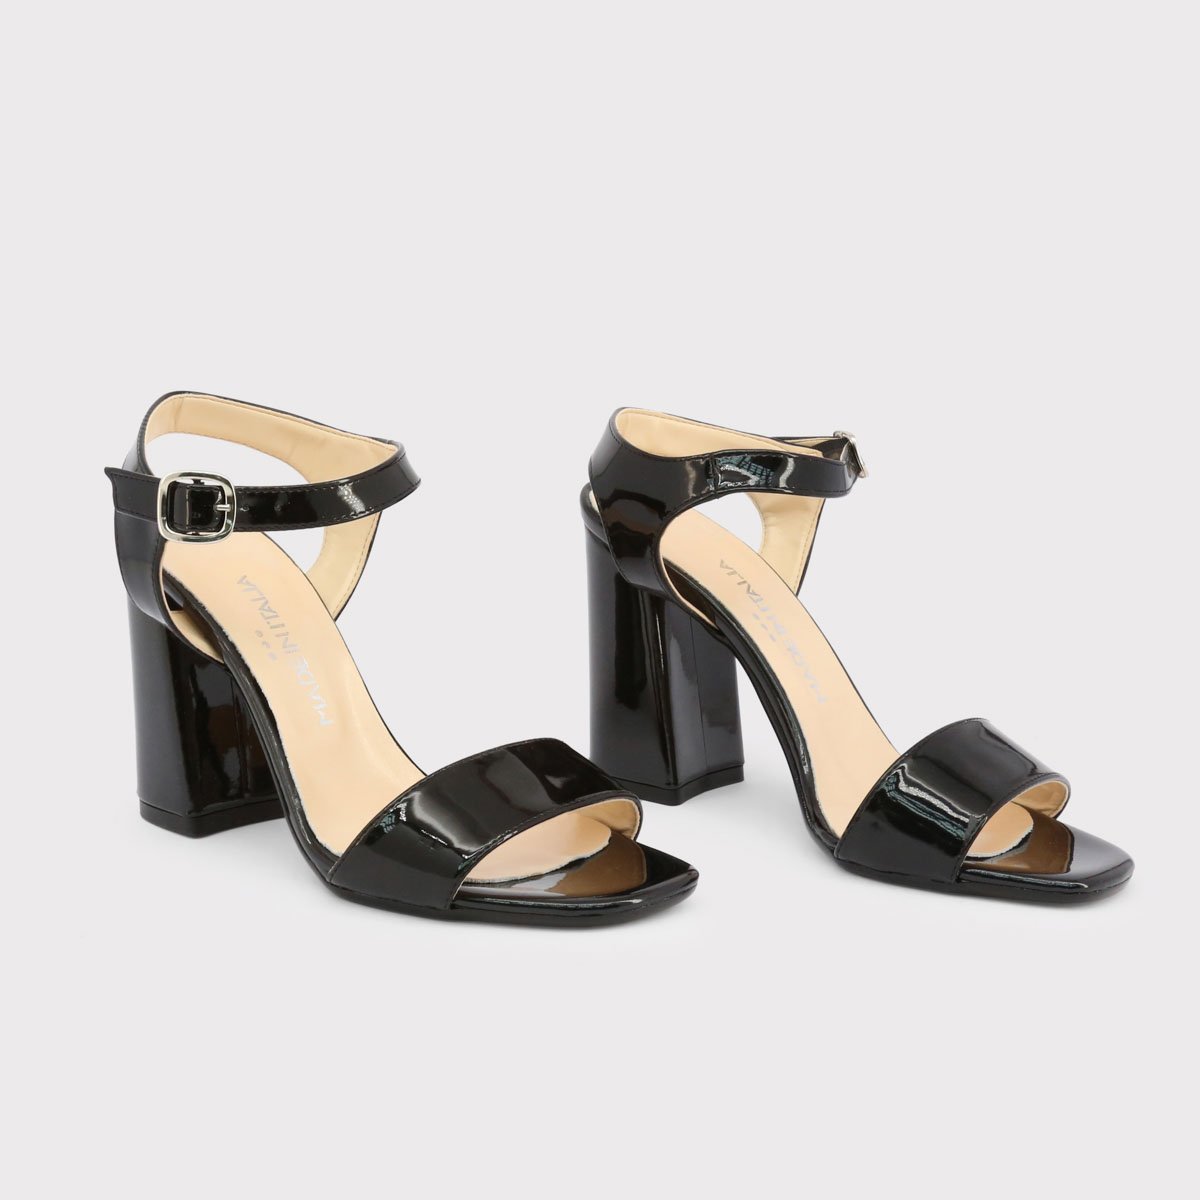 Patent Leather High Heel Sandals